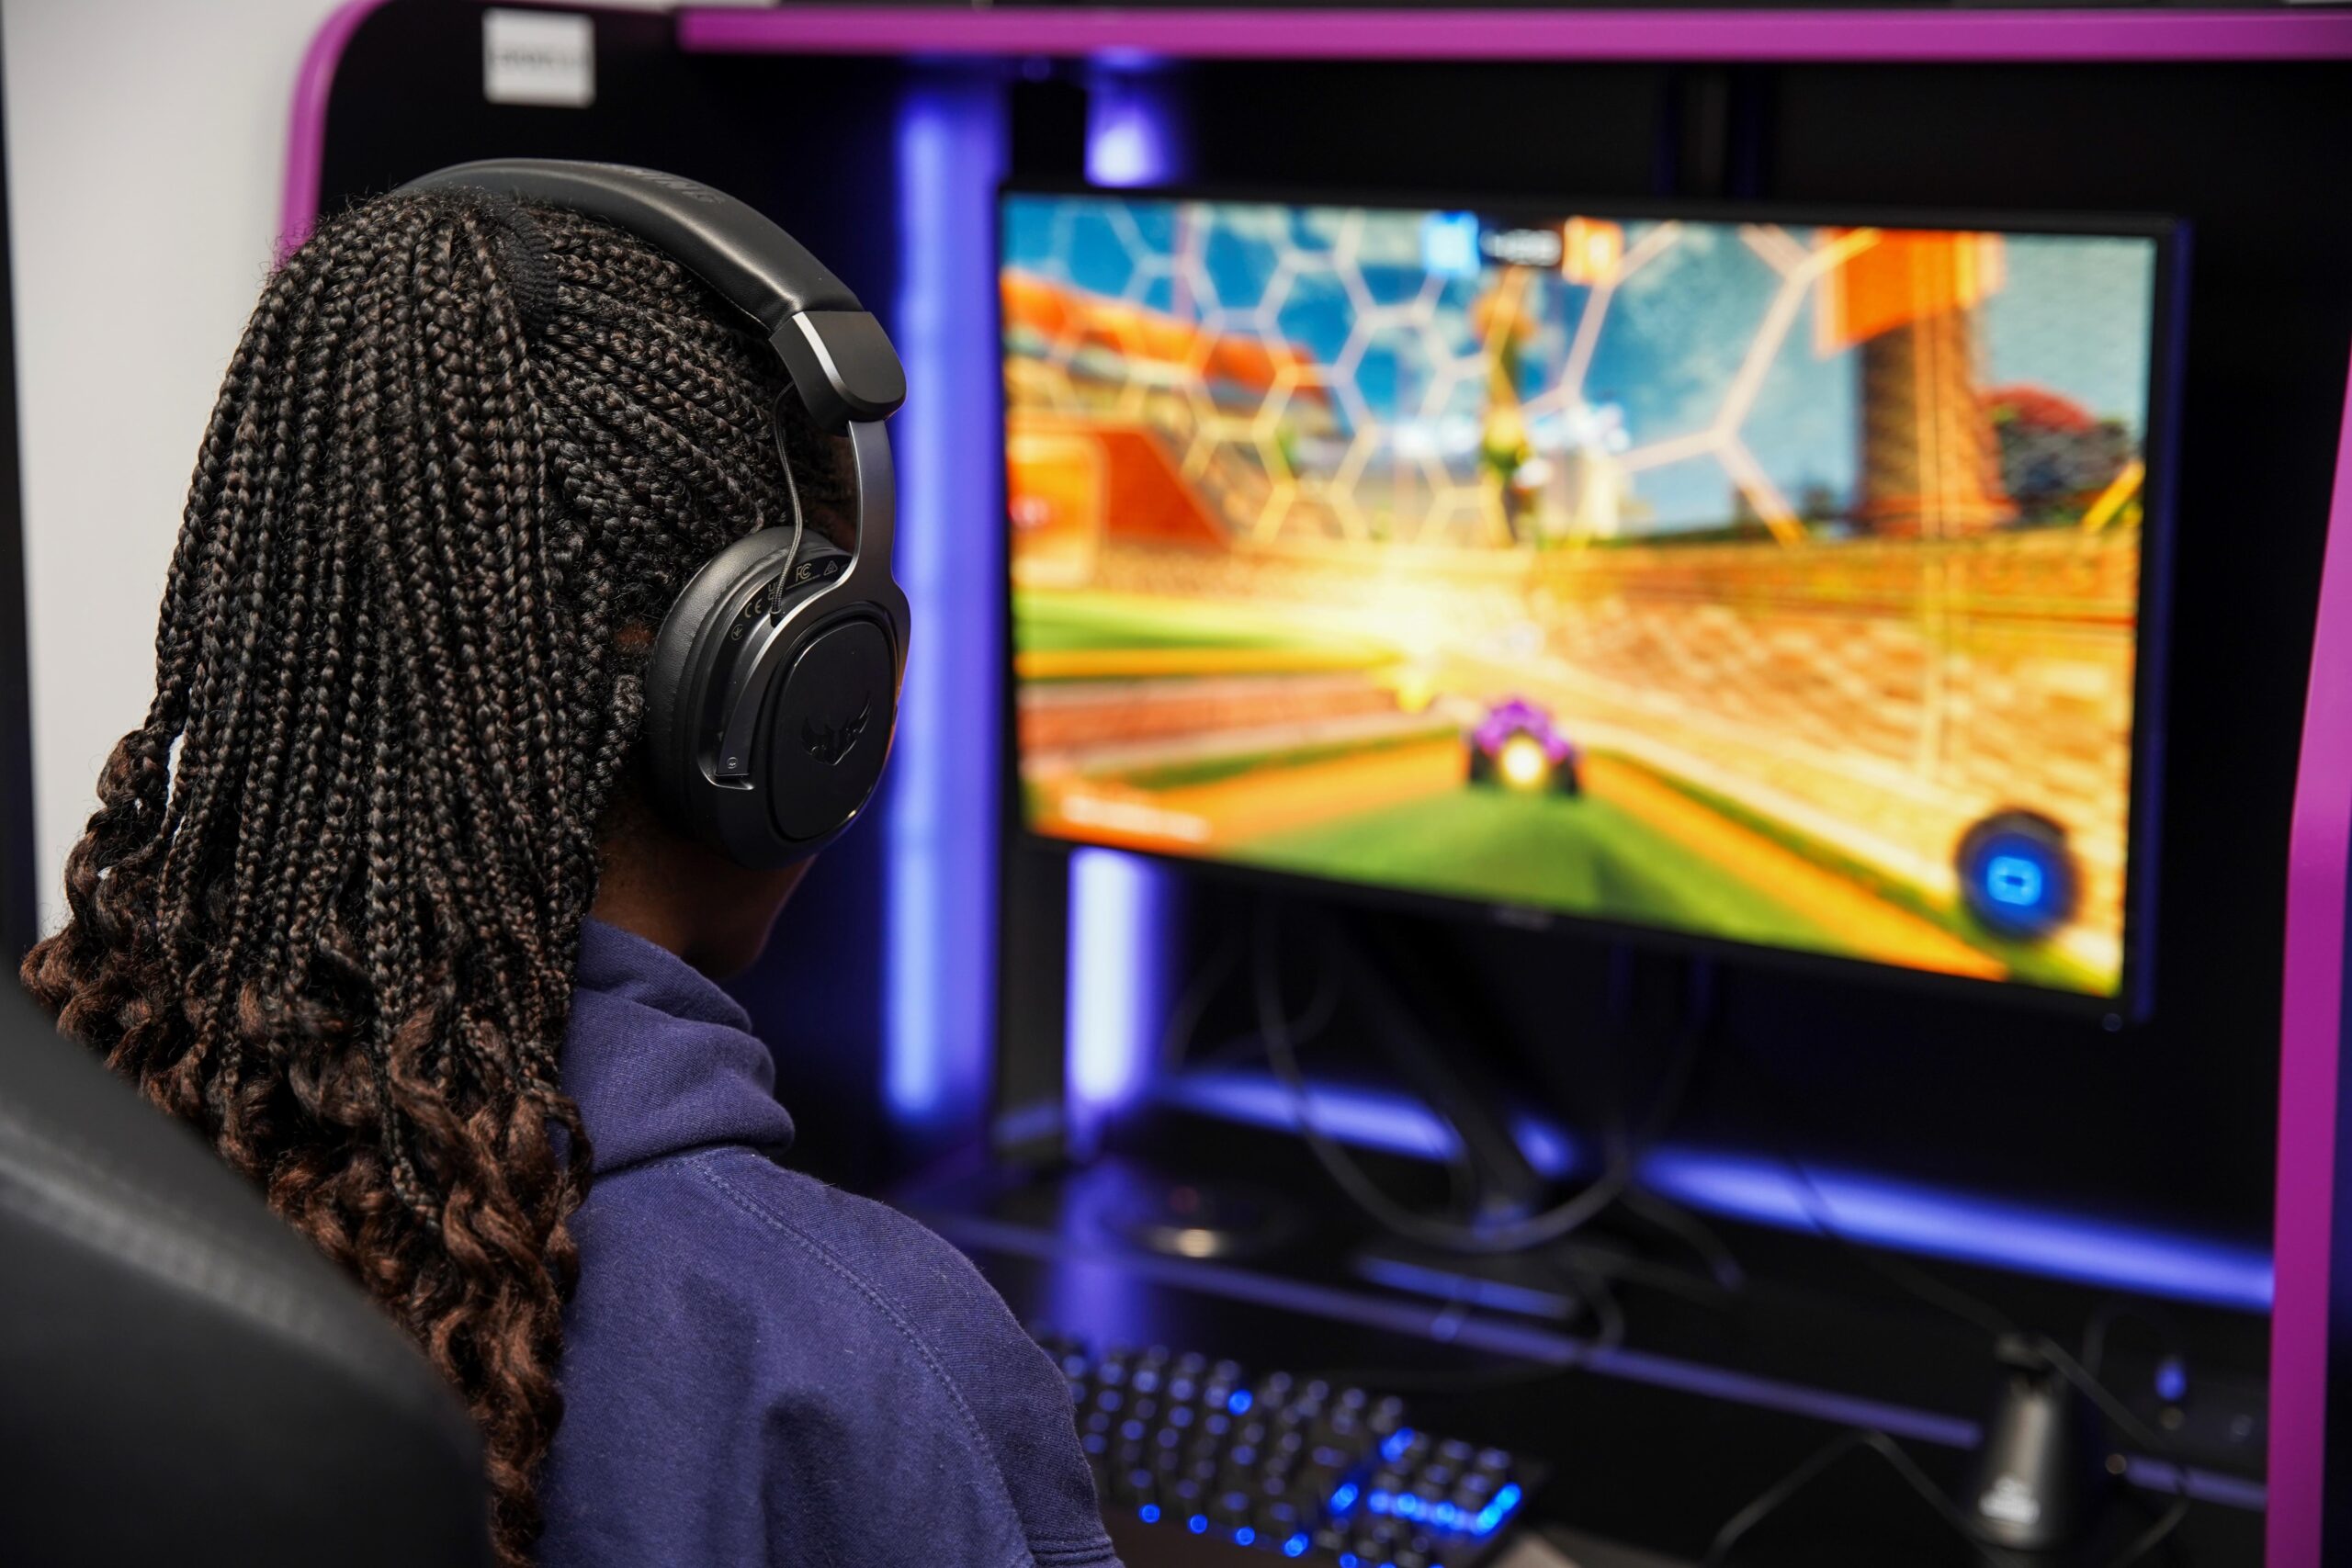 Girl sat in front of computer monitor, wearing headphones while playing a game.